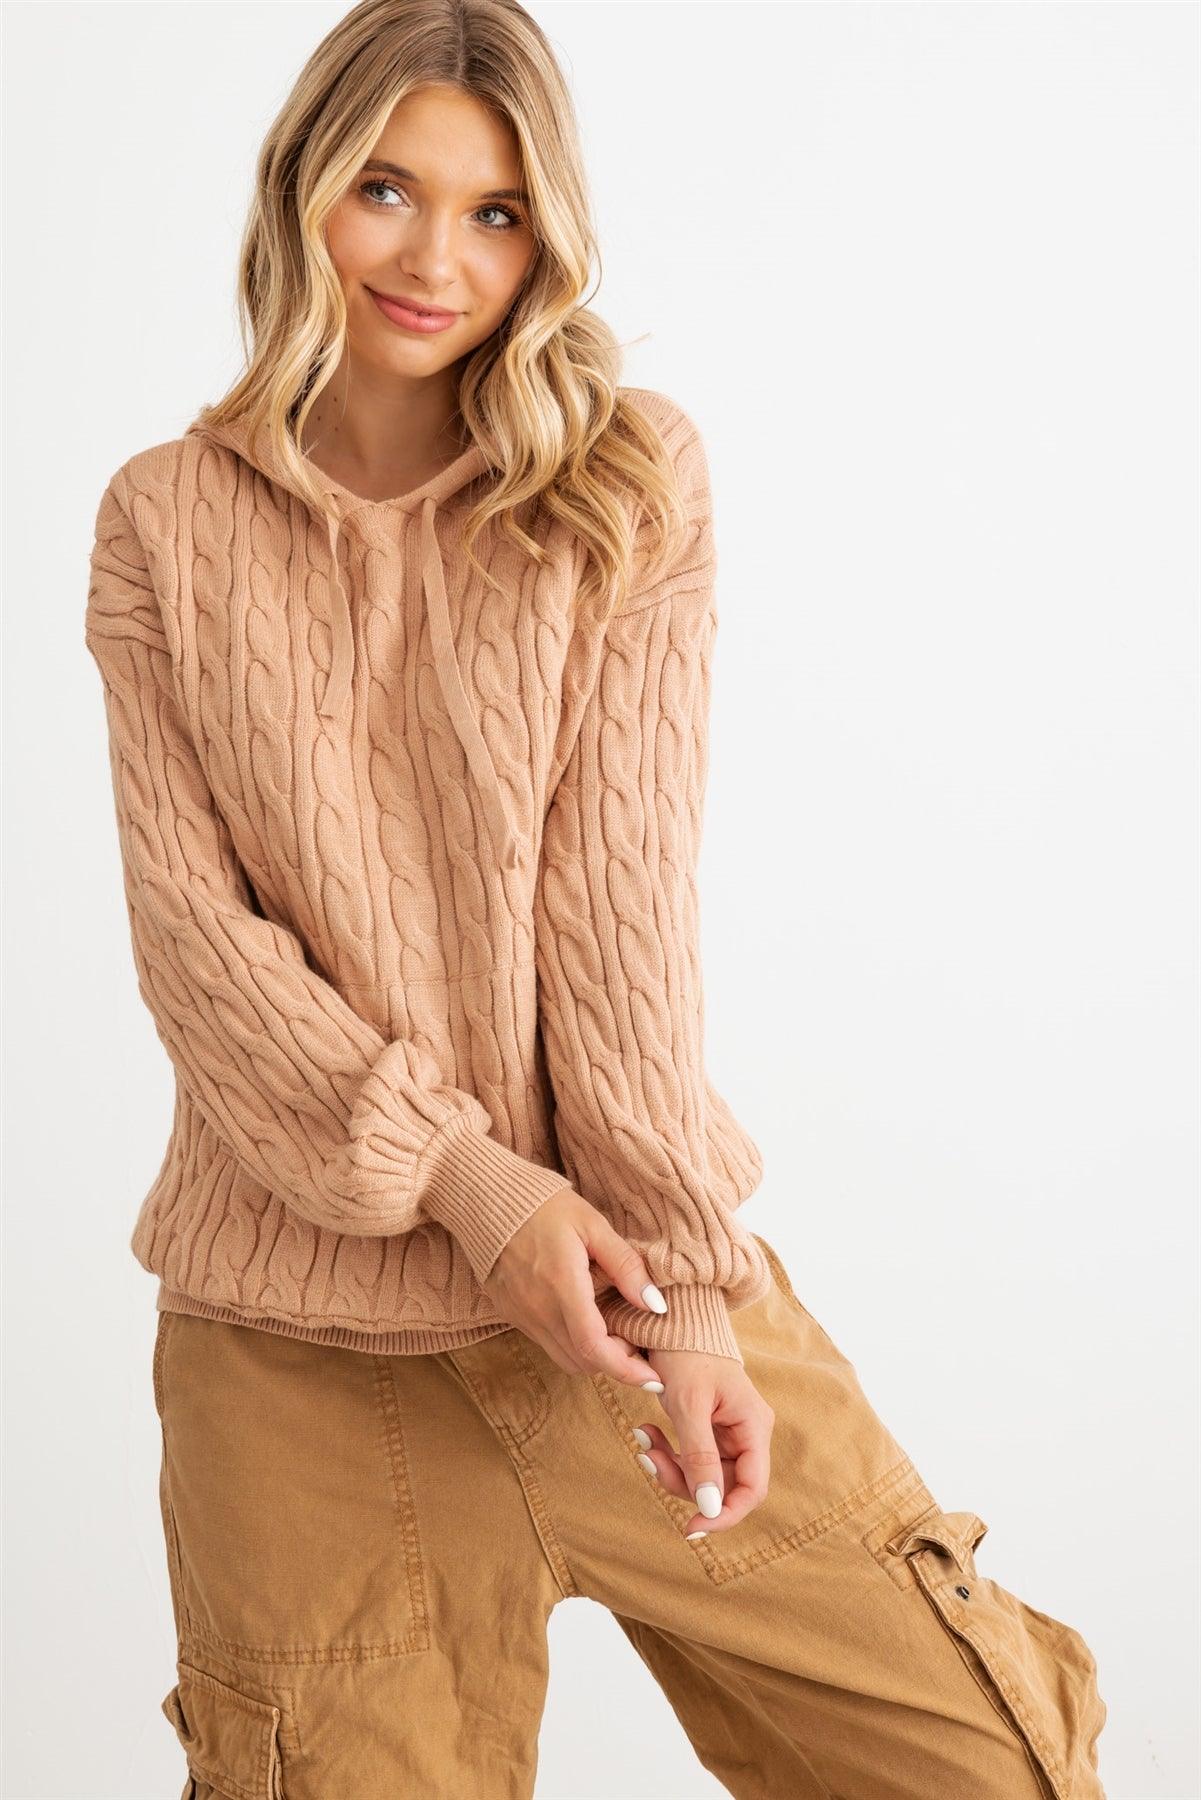 Tan Cable Knit One Pocket Long Sleeve Hooded Top /2-2-2